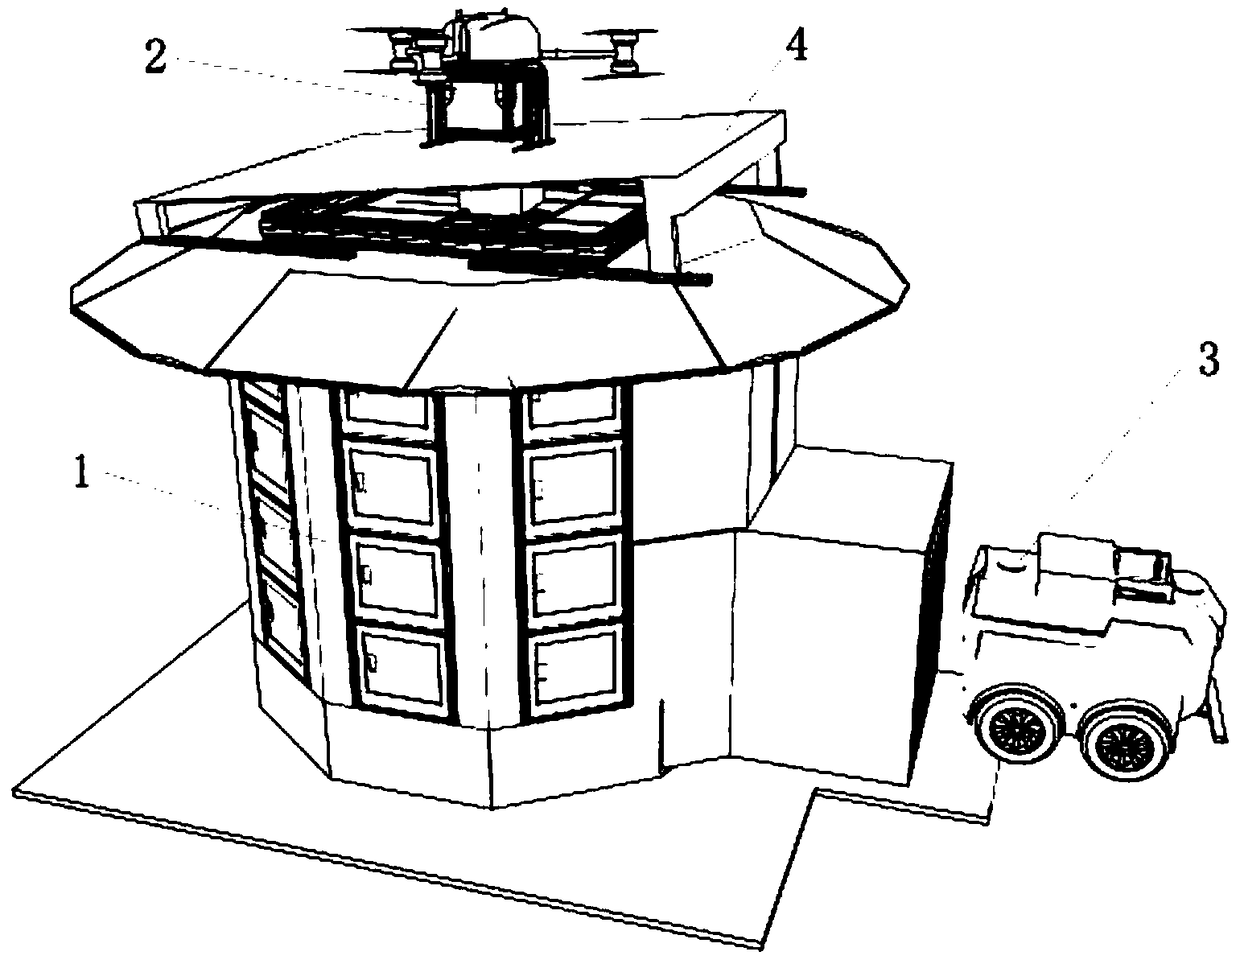 Goods pick-up and delivery express cabinet with unmanned aerial vehicle and unmanned vehicle